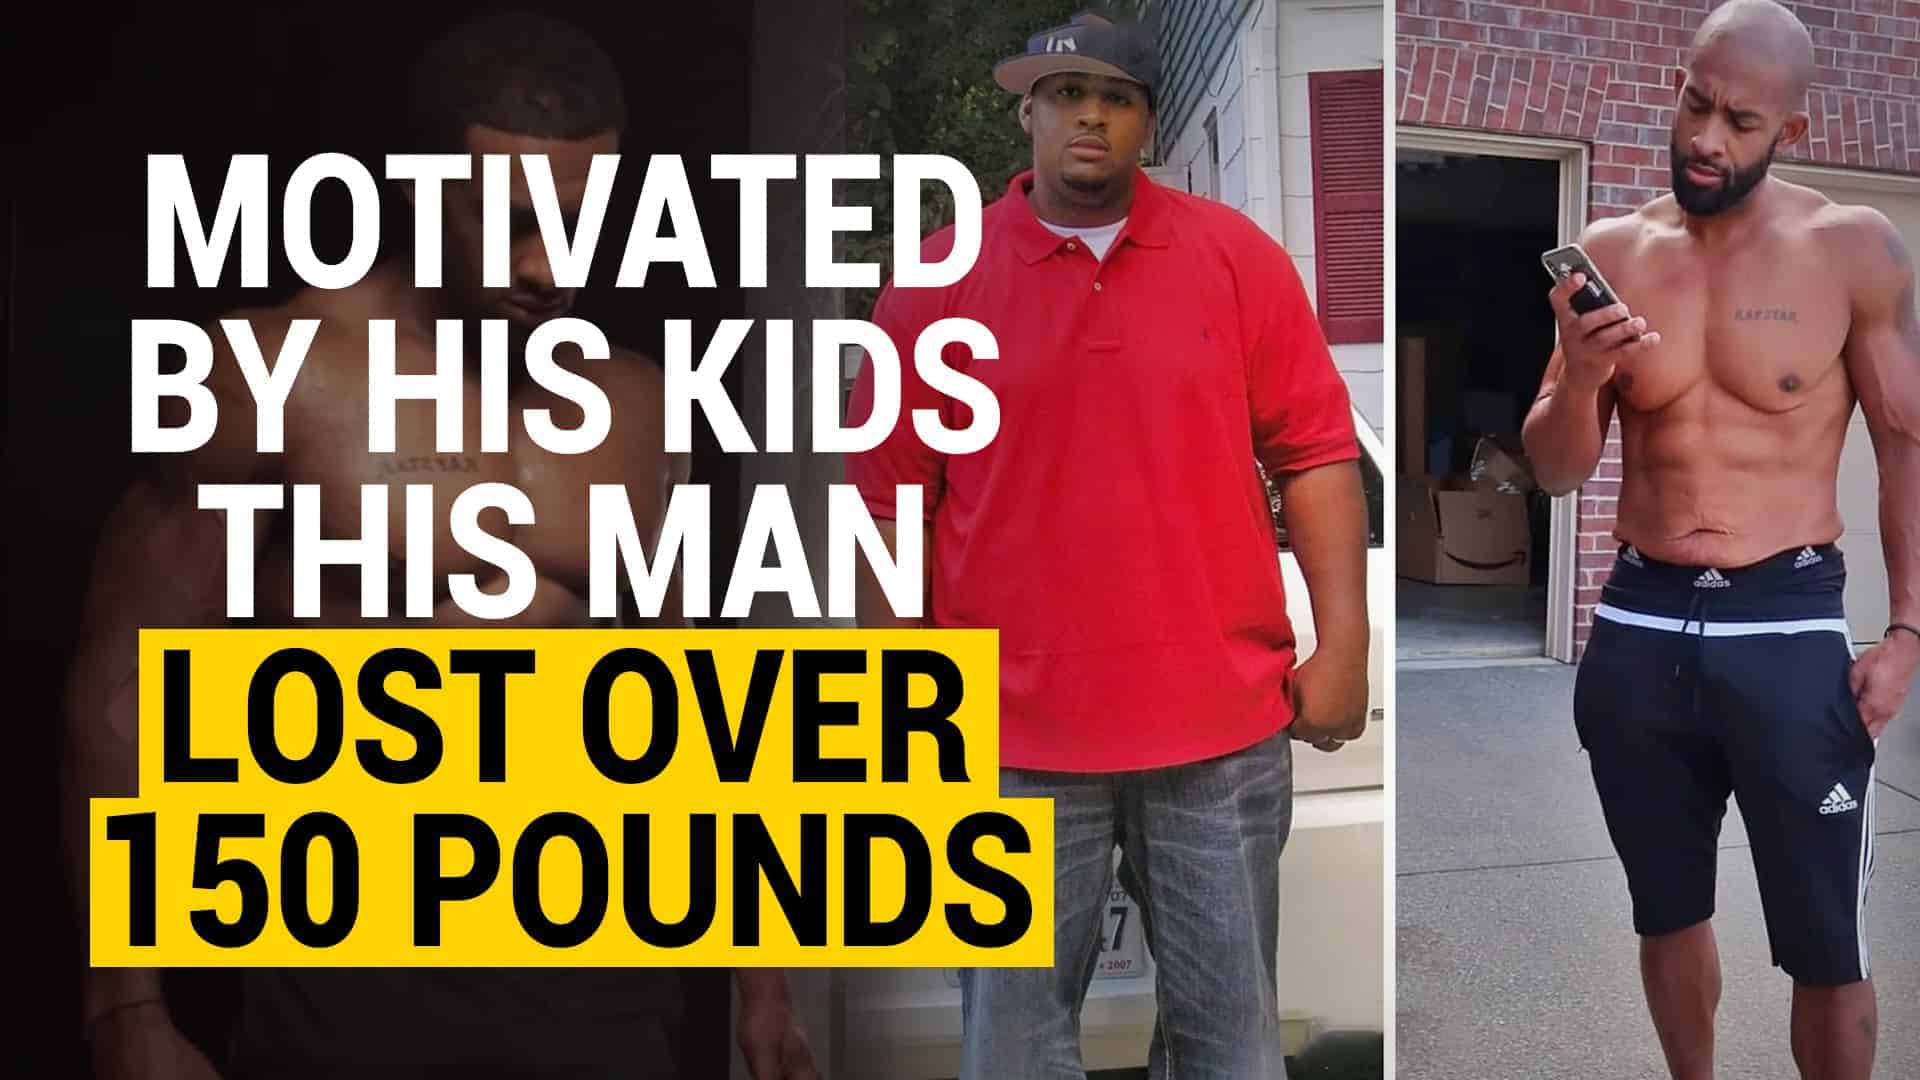 Motivated by his Children, Man Loses Over 150 Pounds